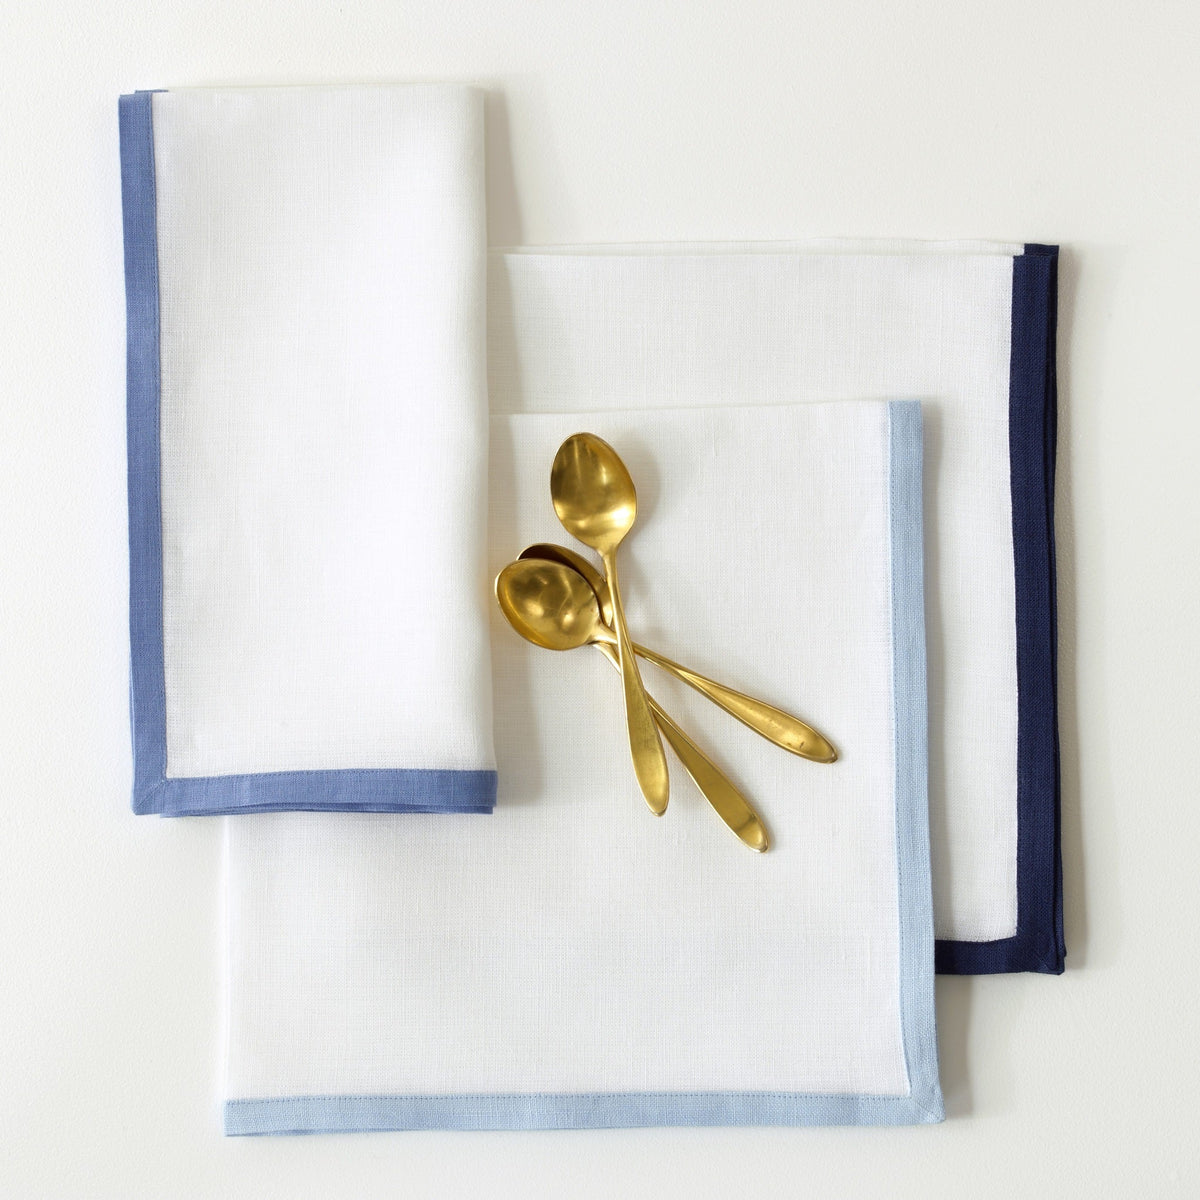 Matouk Border Napkins with Gold Spoons in Different Colors